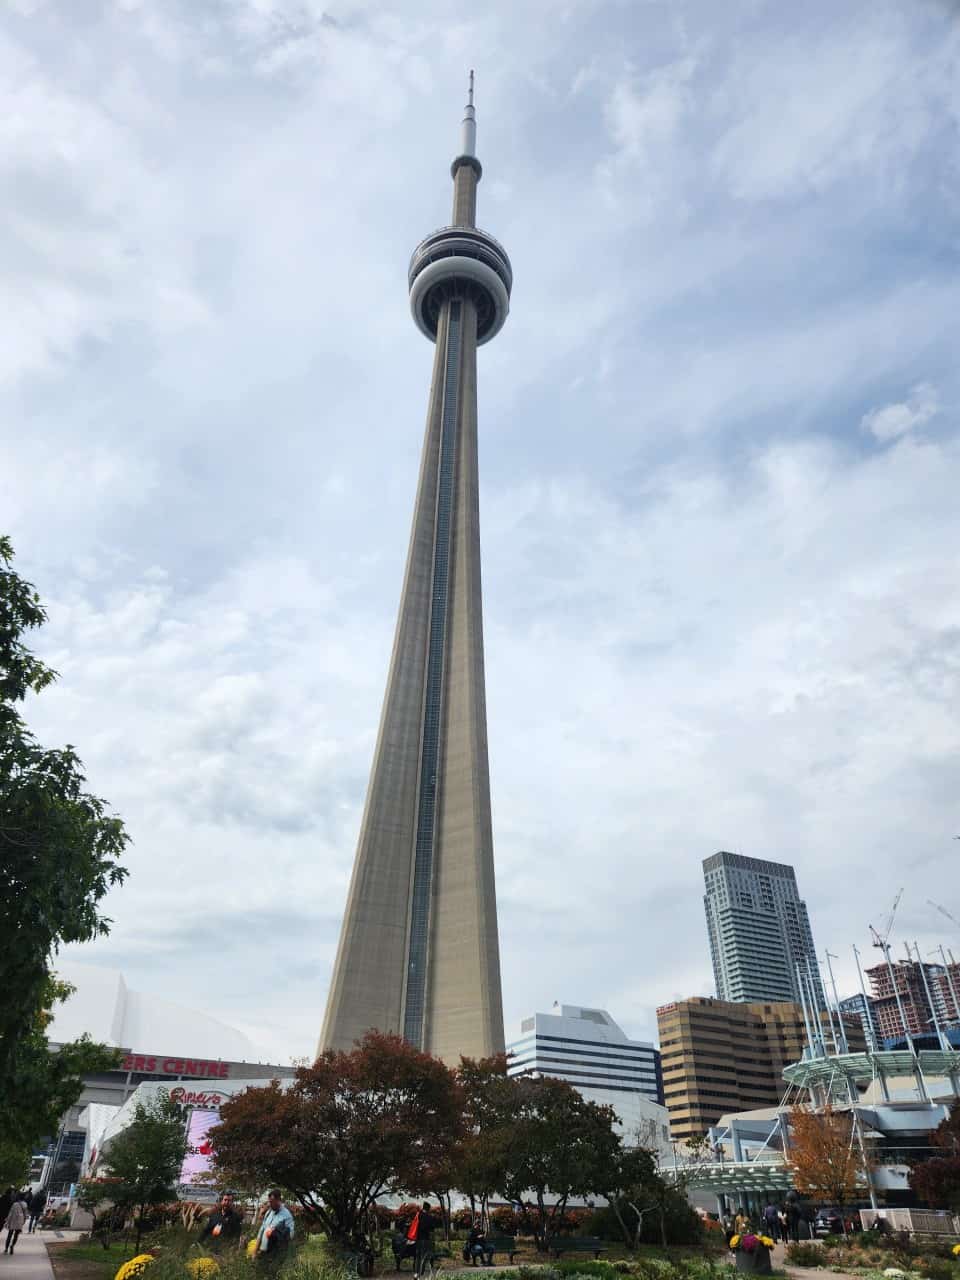 CN Tower in Toronto Ontario Canada  - A significant landmark to the Toronto area since 1976. The CN Tower, as well as the surrounding area are fun places to explore when traveling. 